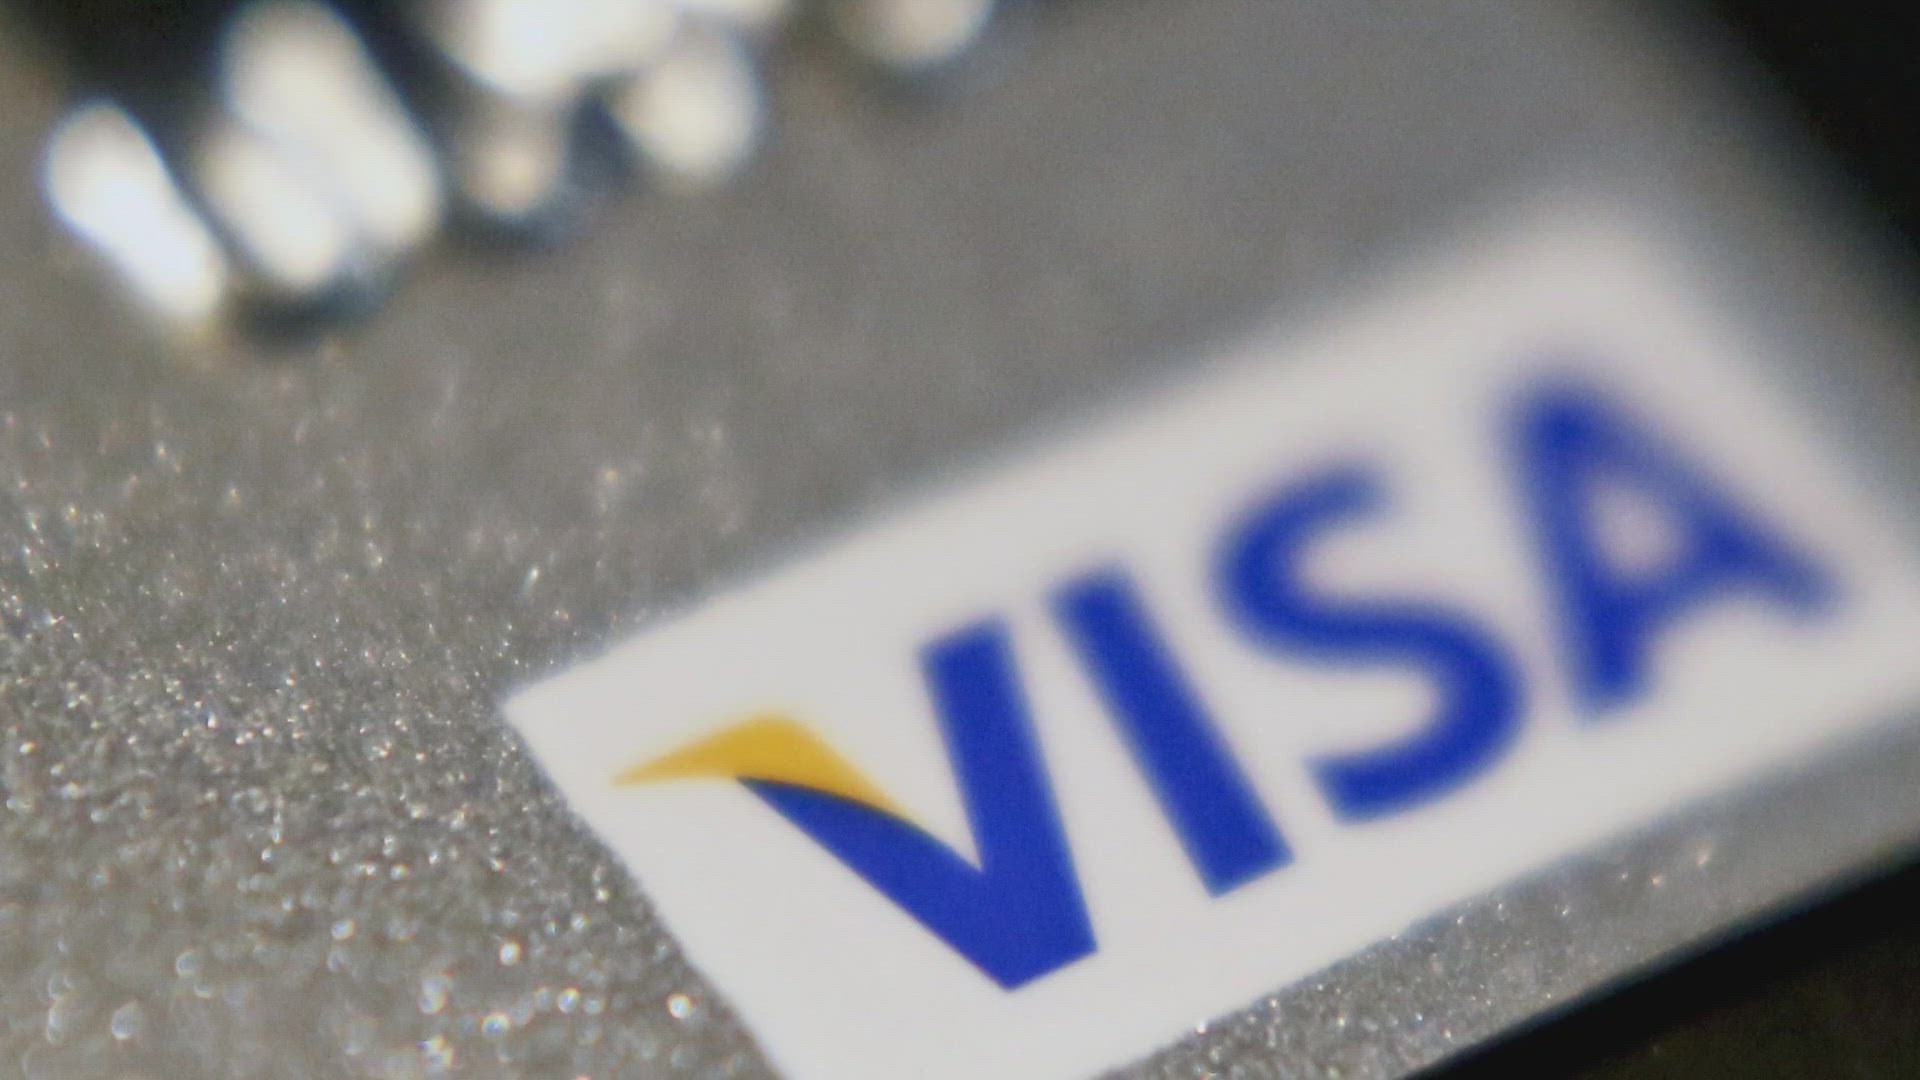 Here's what changes are rolling out when it comes to paying with Visa.